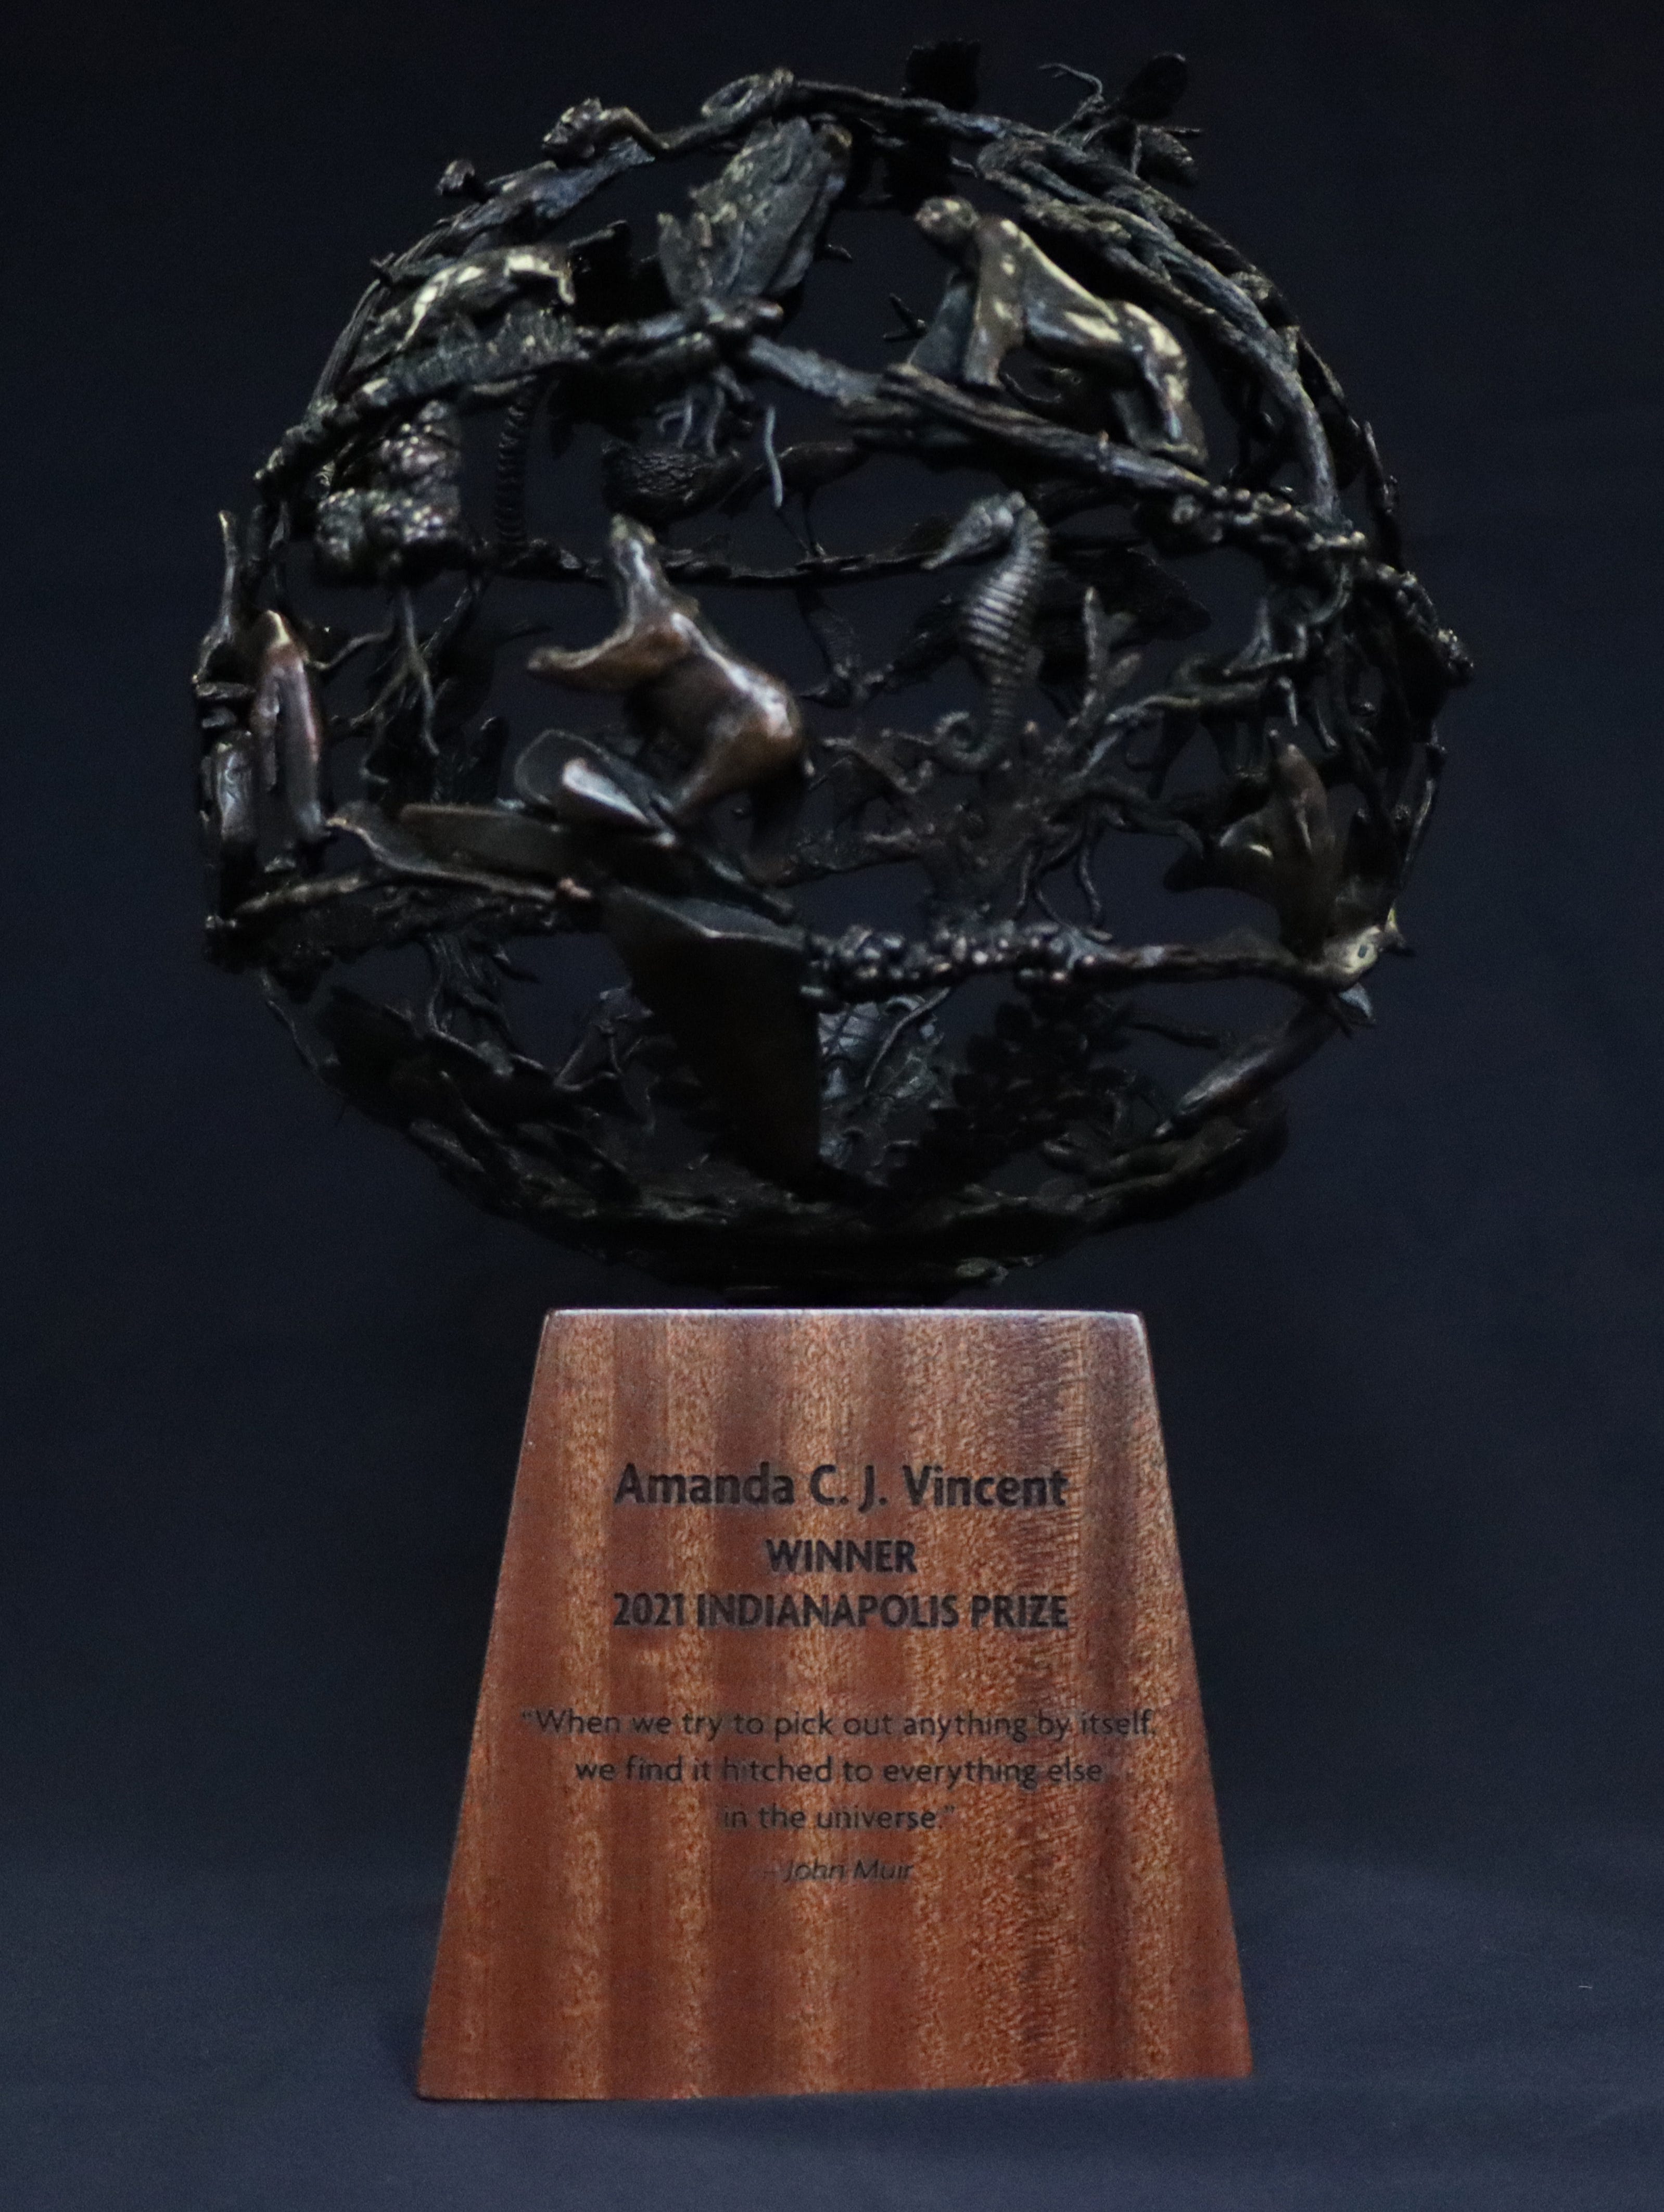 The Indianapolis Prize award, updated in 2021 when Amanda Vincent won the honor, was created by South African sculptor Bruce Little.